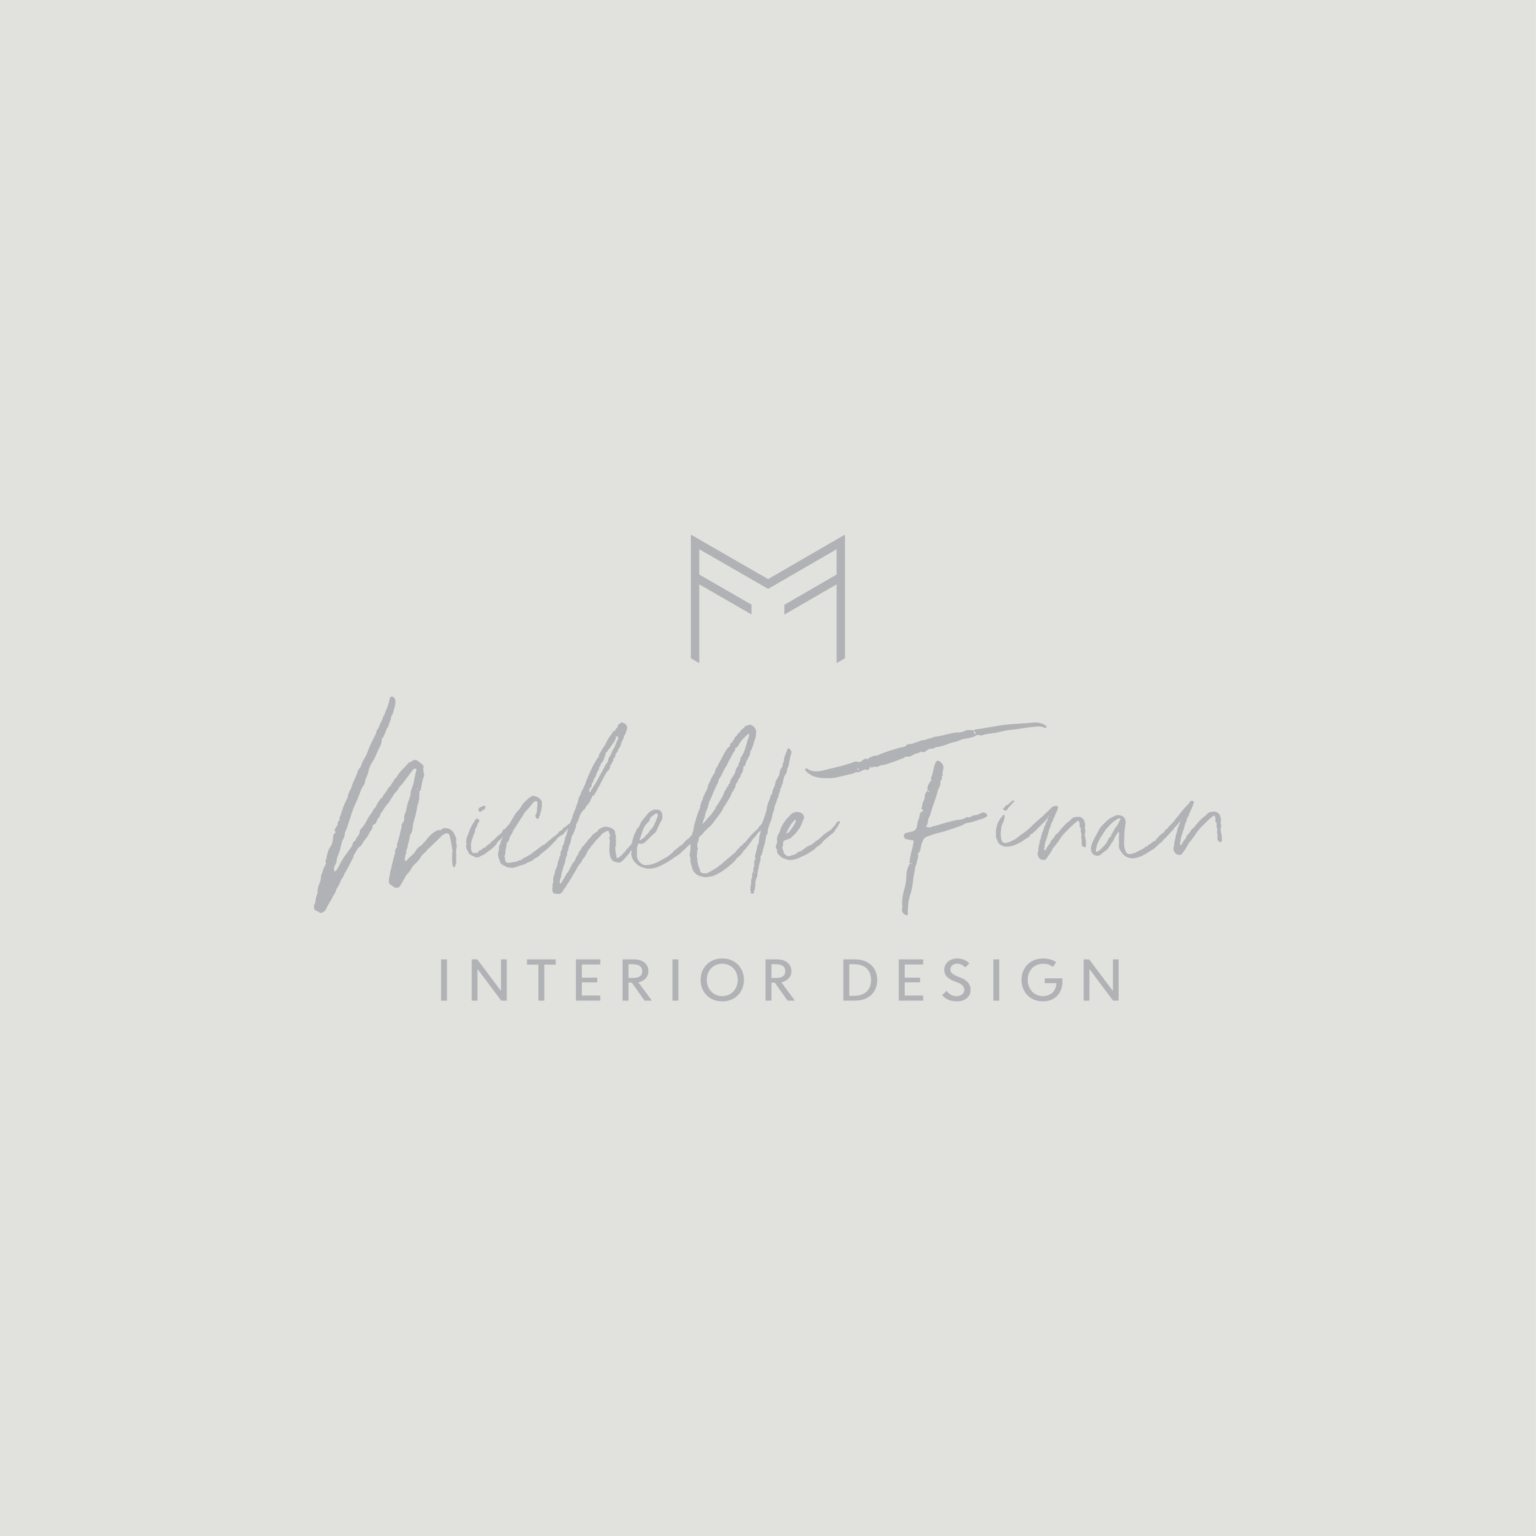 Michelle Finan Interiors Pigeon and Cloud signature logo